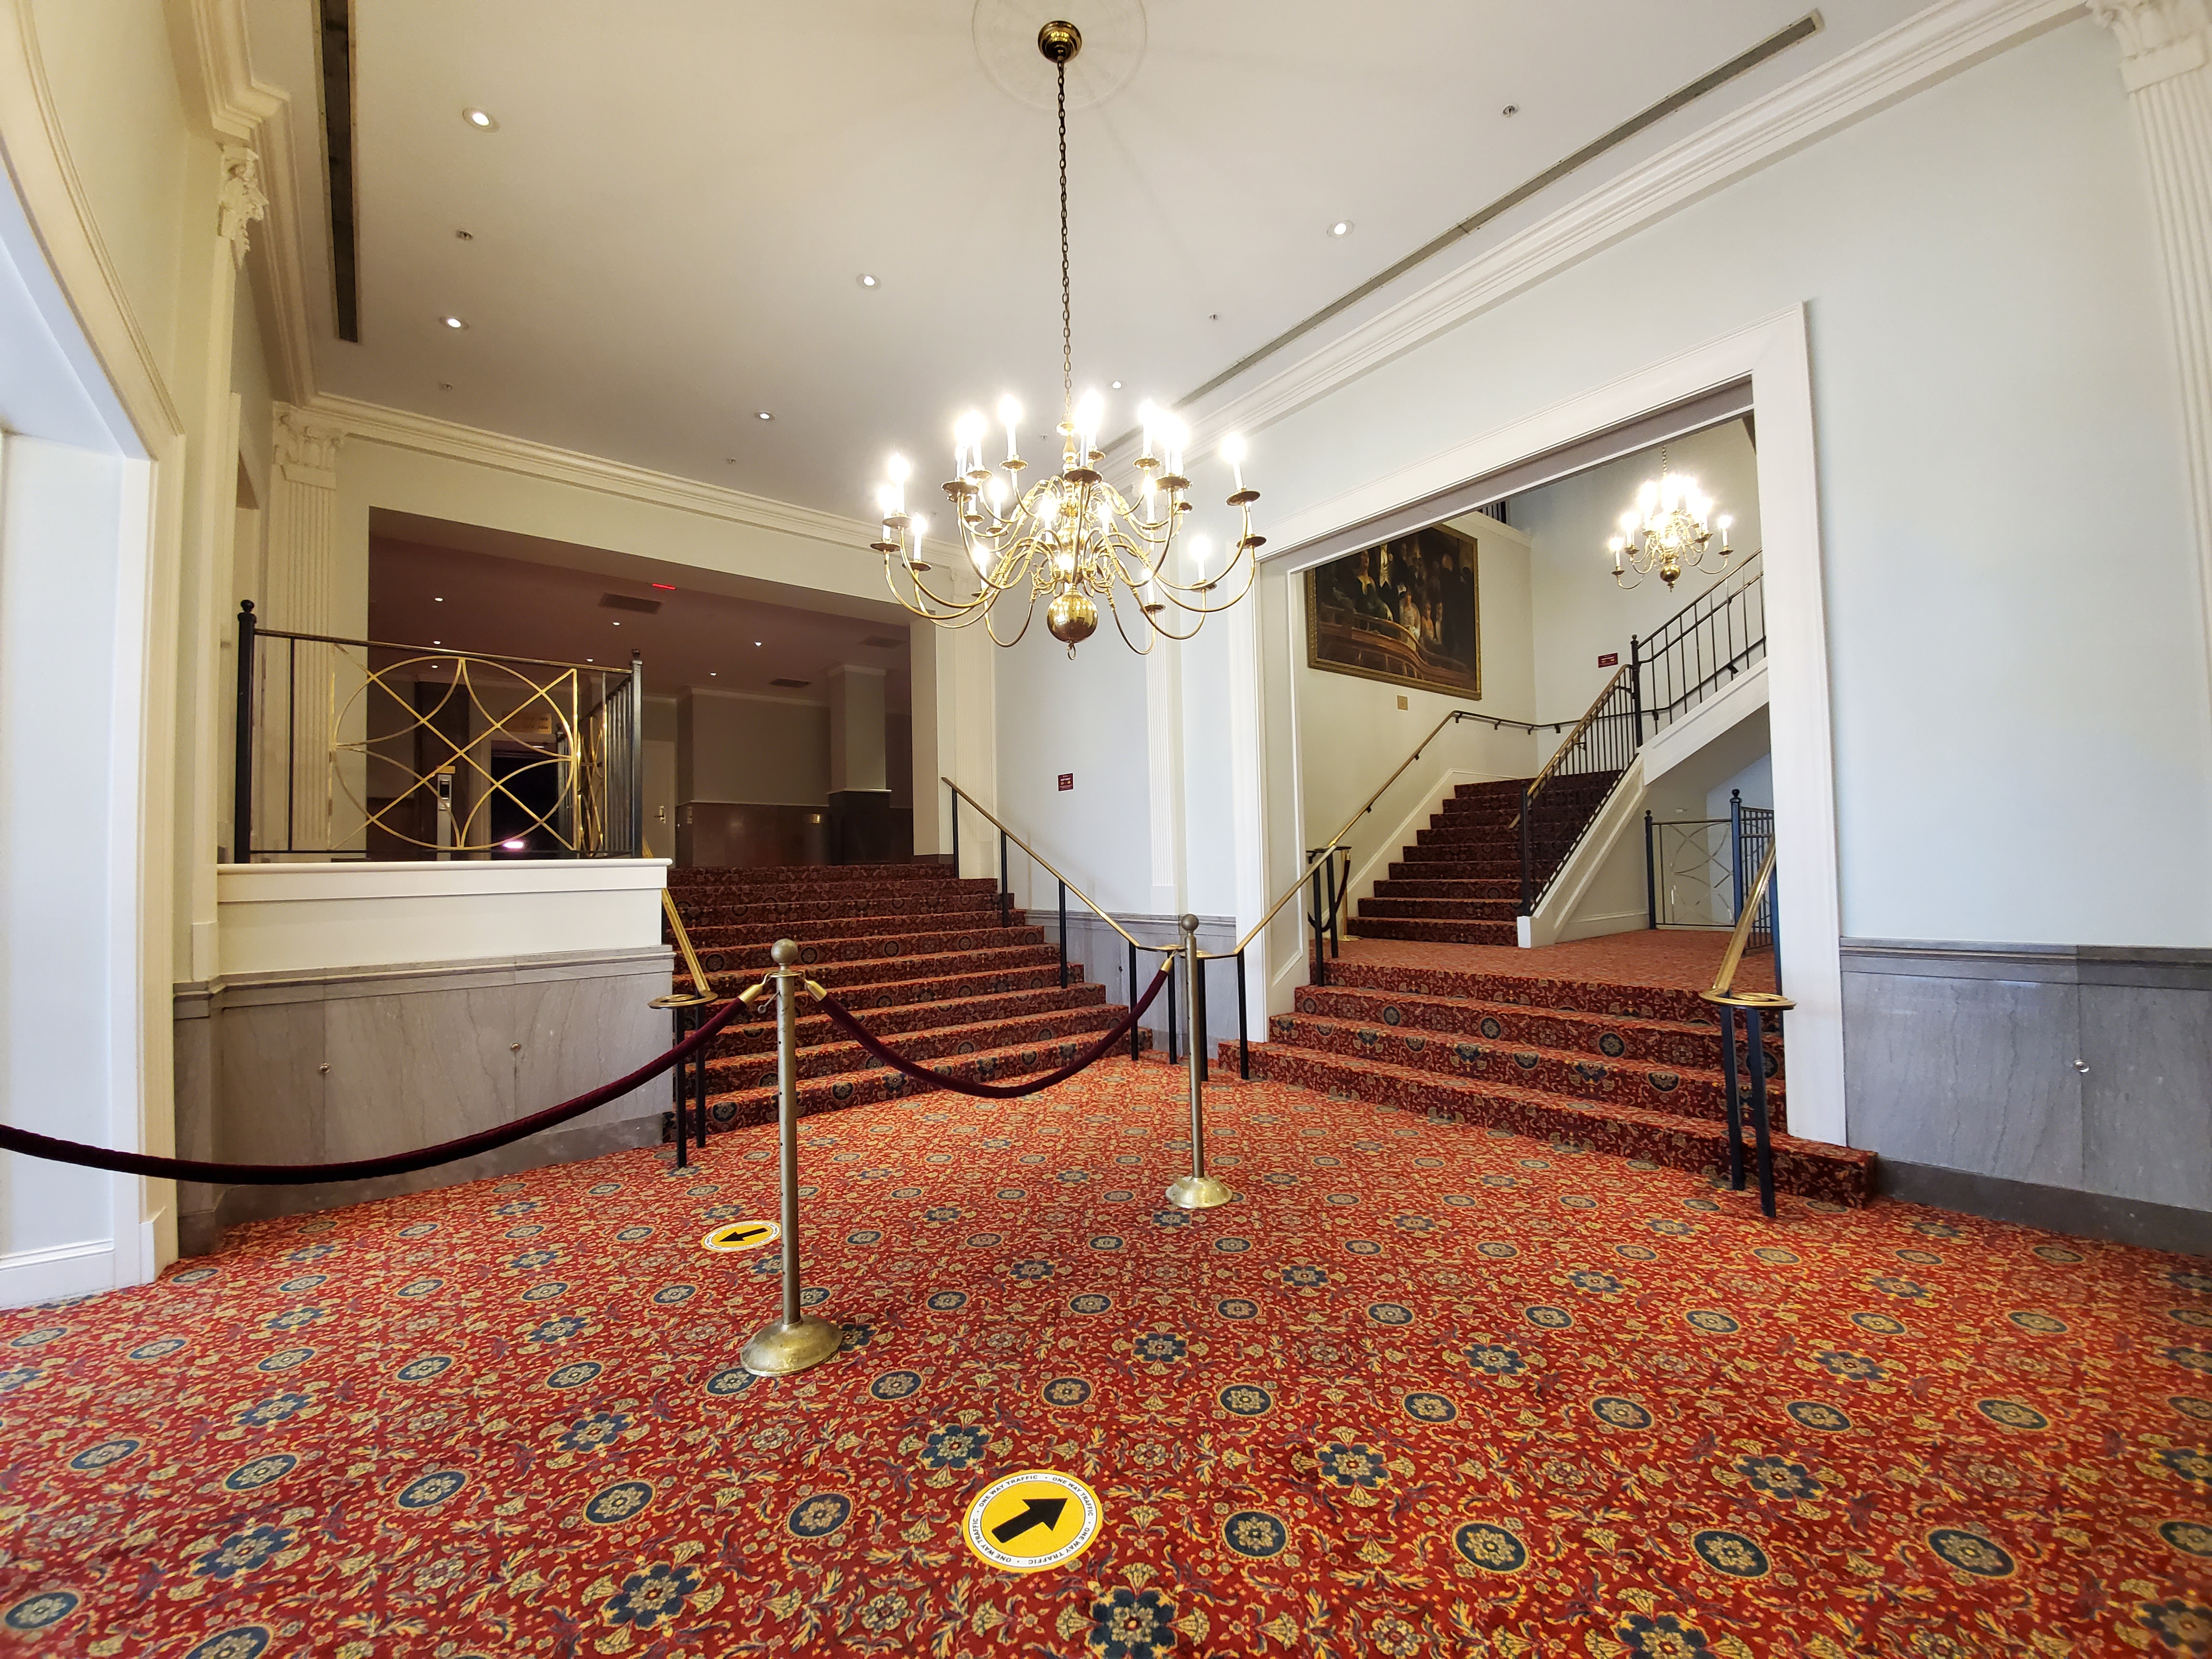 Main Lobby view of staircases